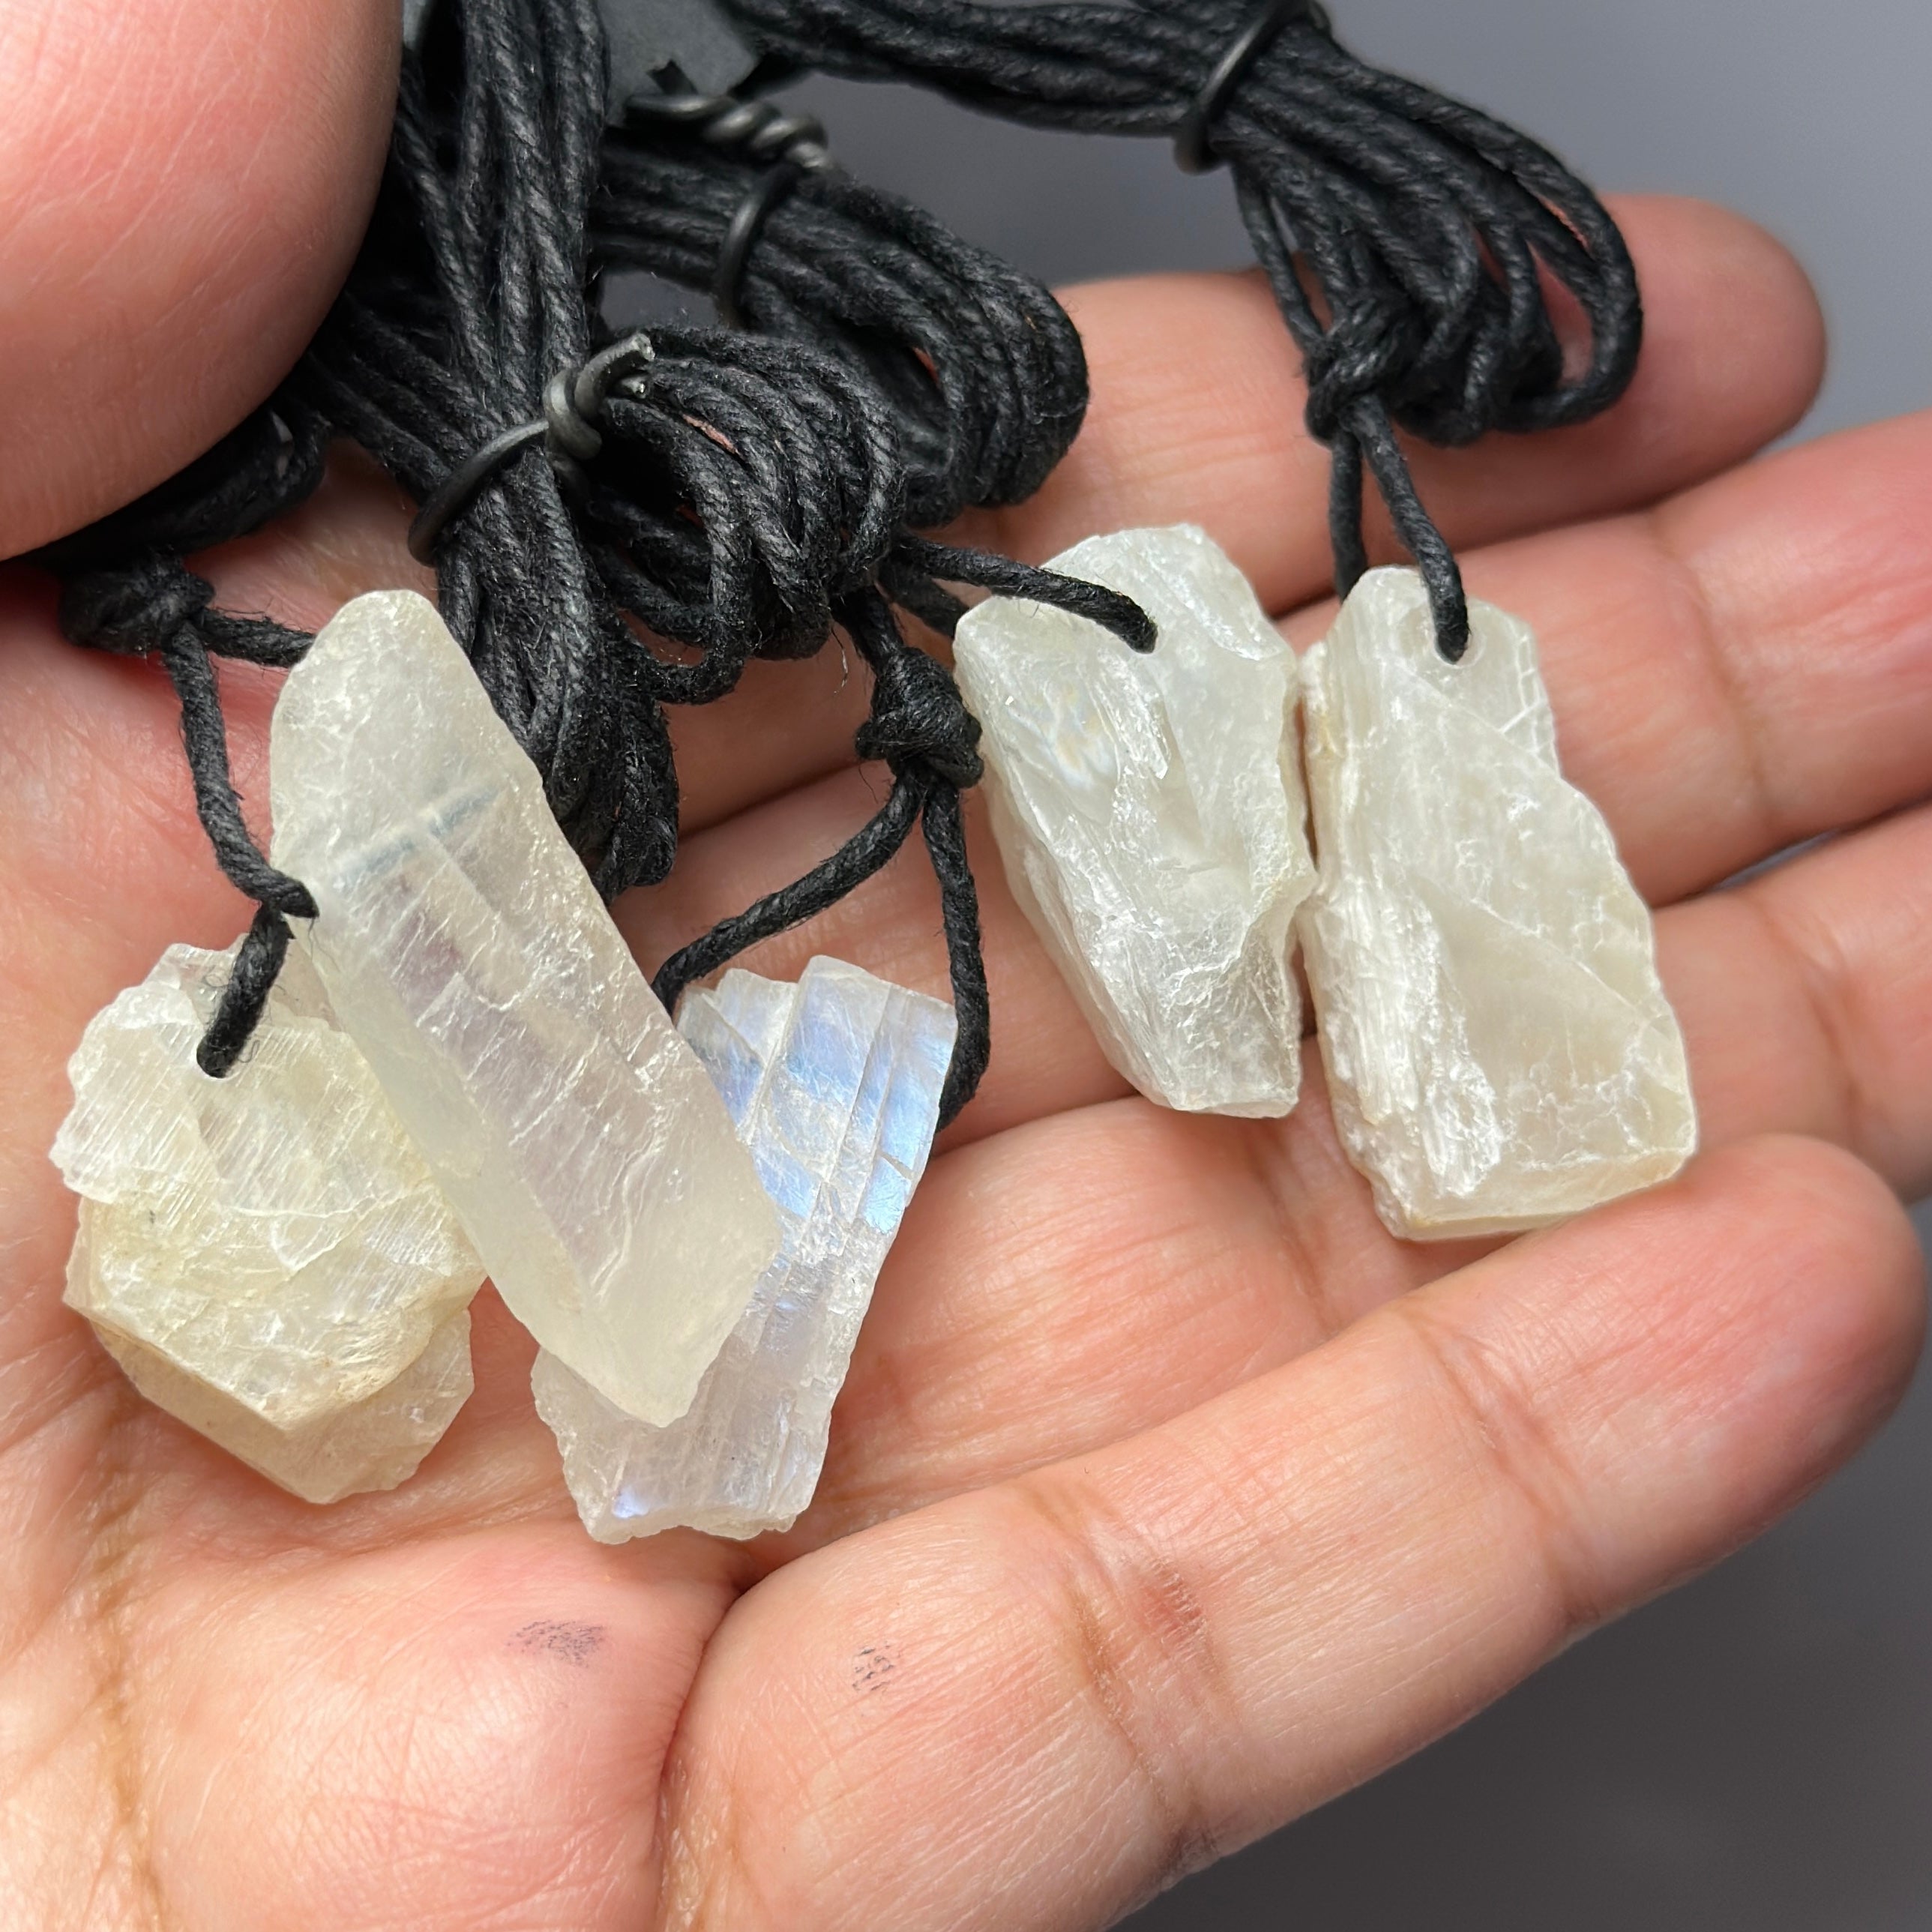 5 pcs Tanzanian Moonstone pendants lot. Price is for all 5